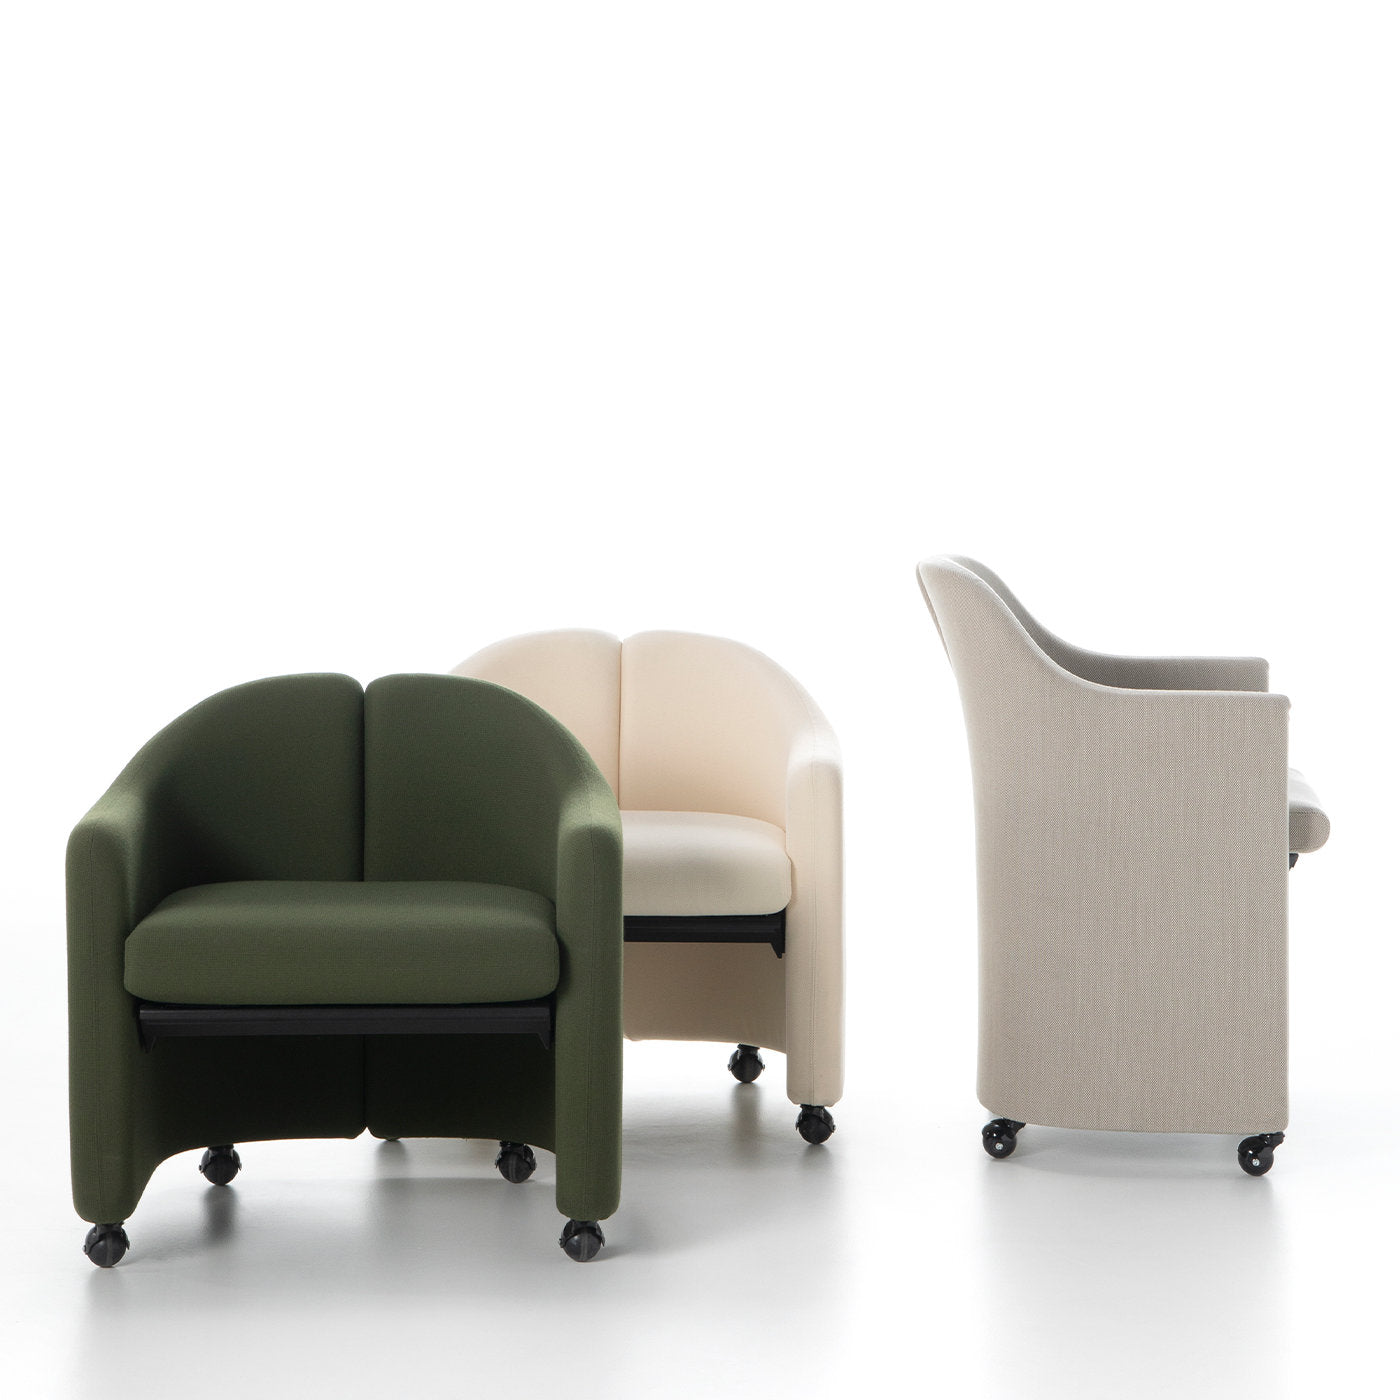 S142 Beige Tall Armchair with Casters by Eugenio Gerli - Alternative view 1